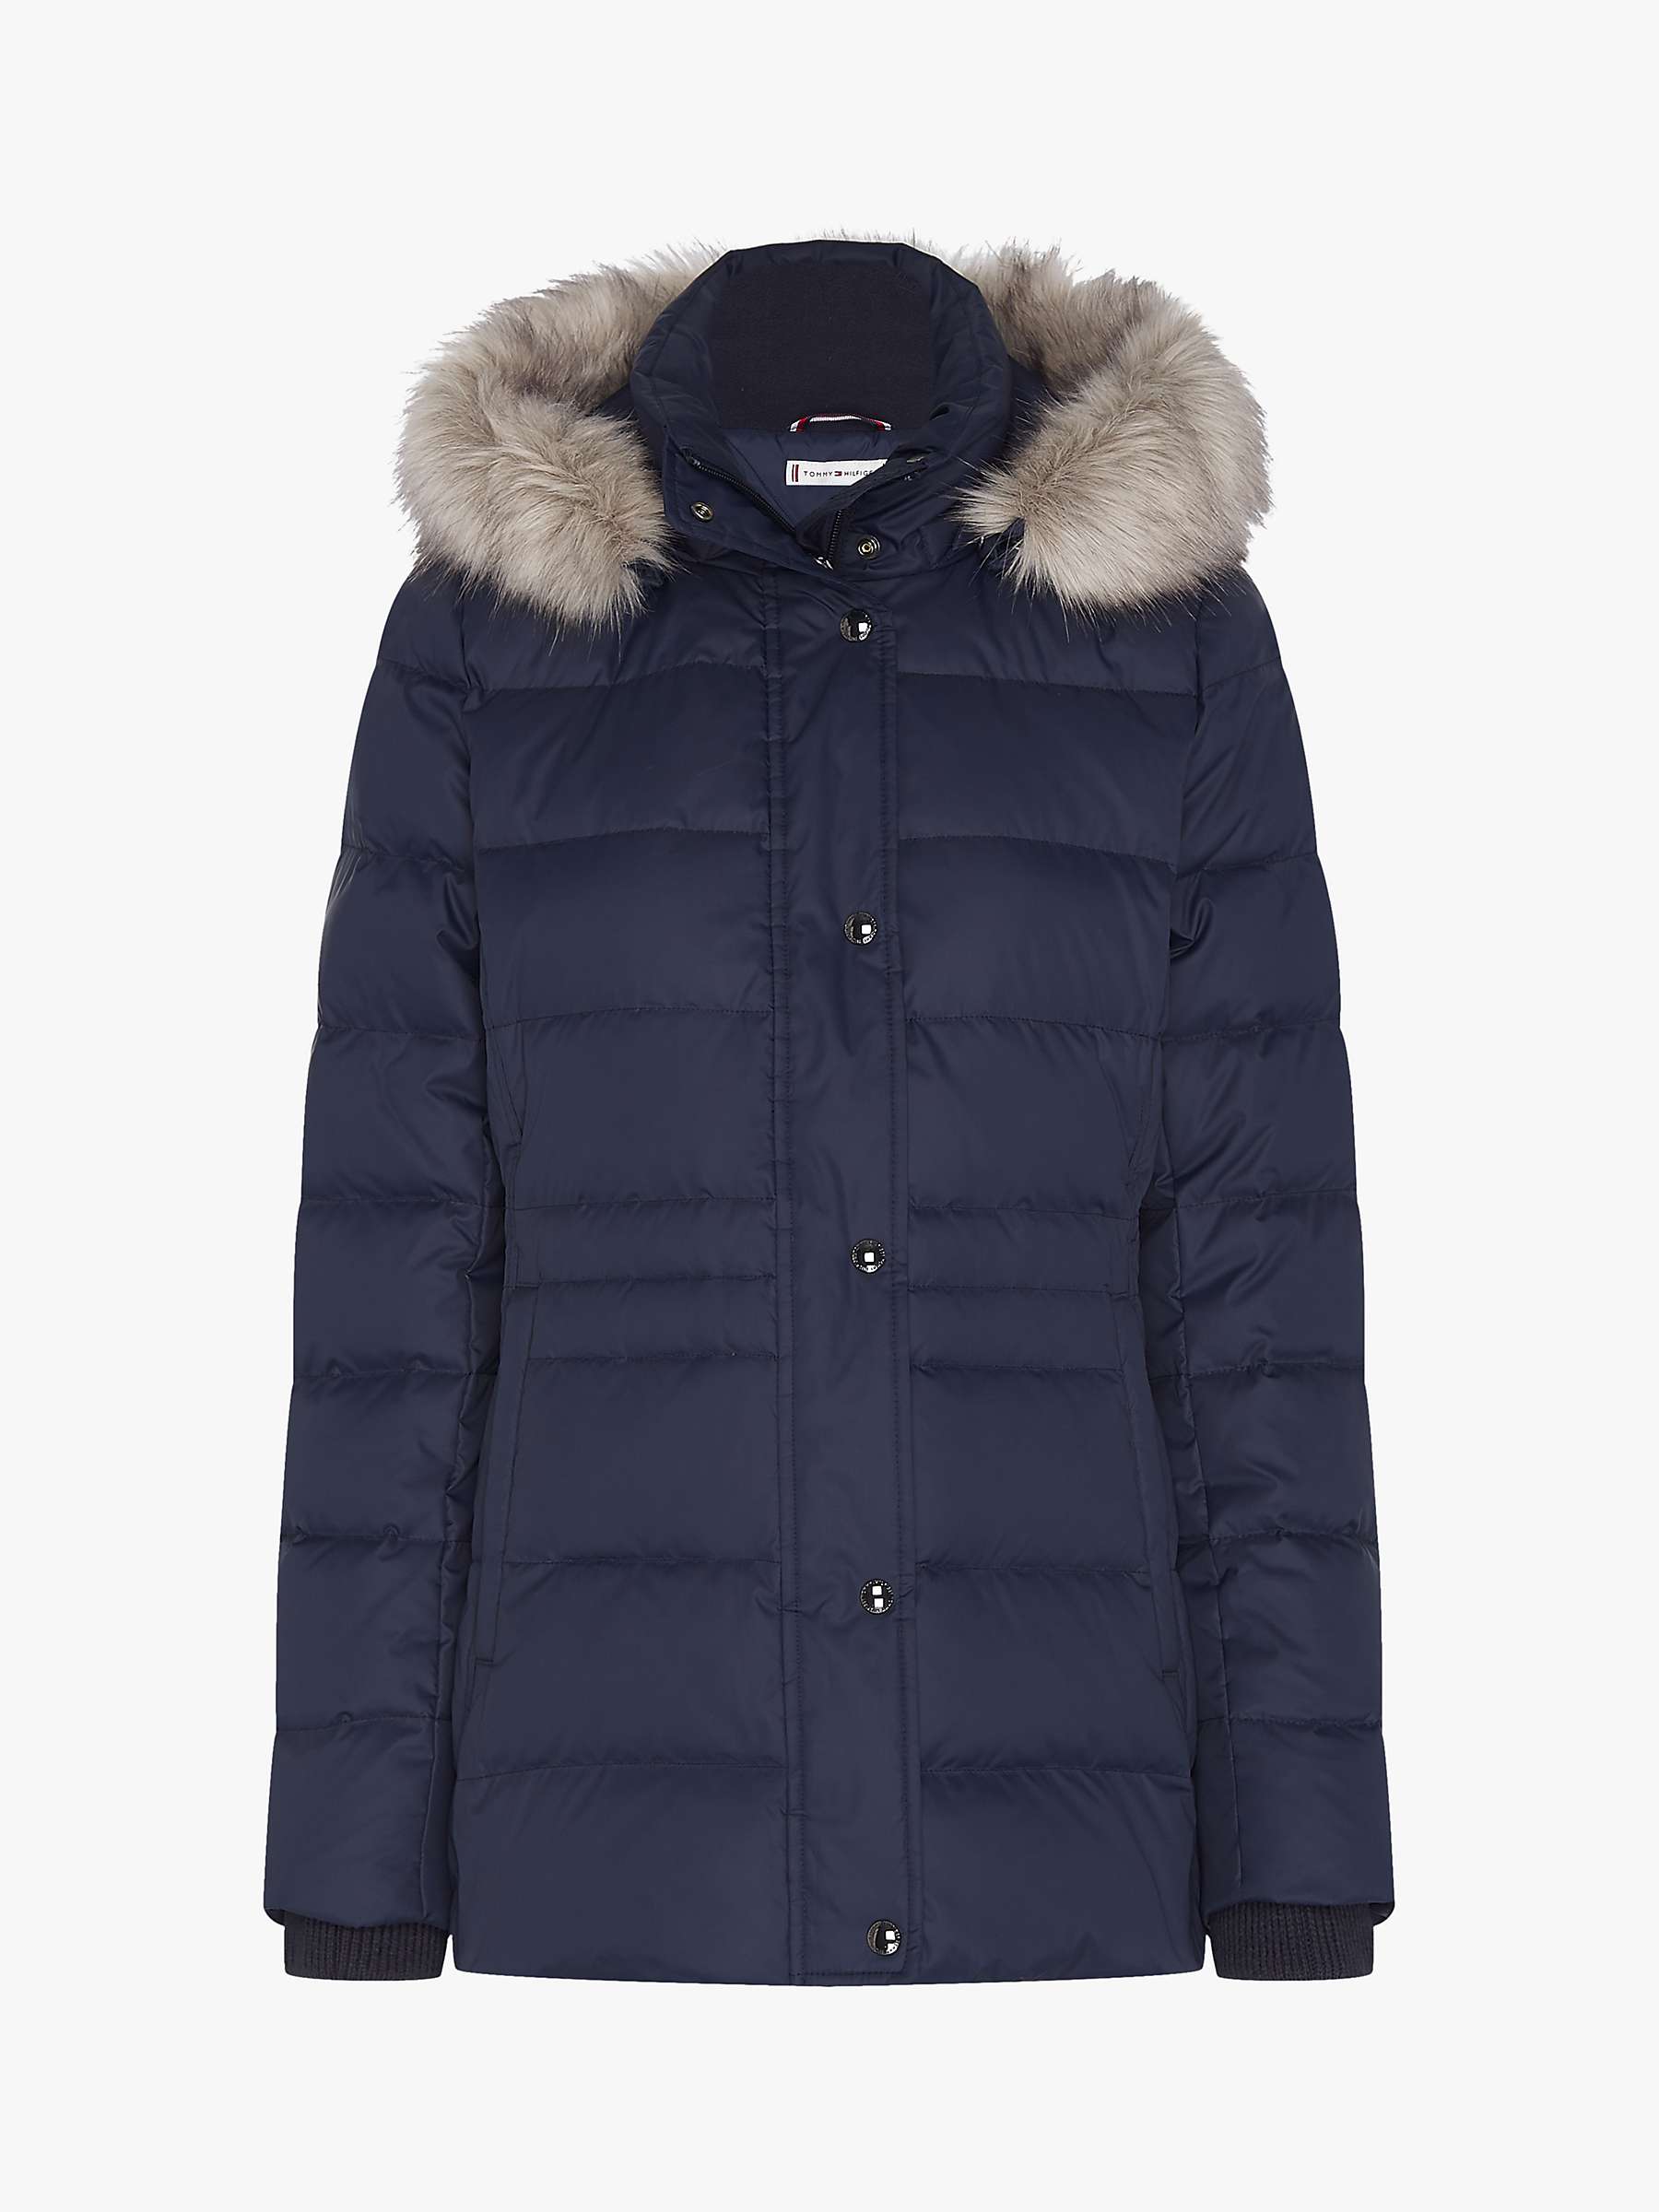 Buy Tommy Hilfiger Tyra Quilted Jacket, Desert Sky Online at johnlewis.com